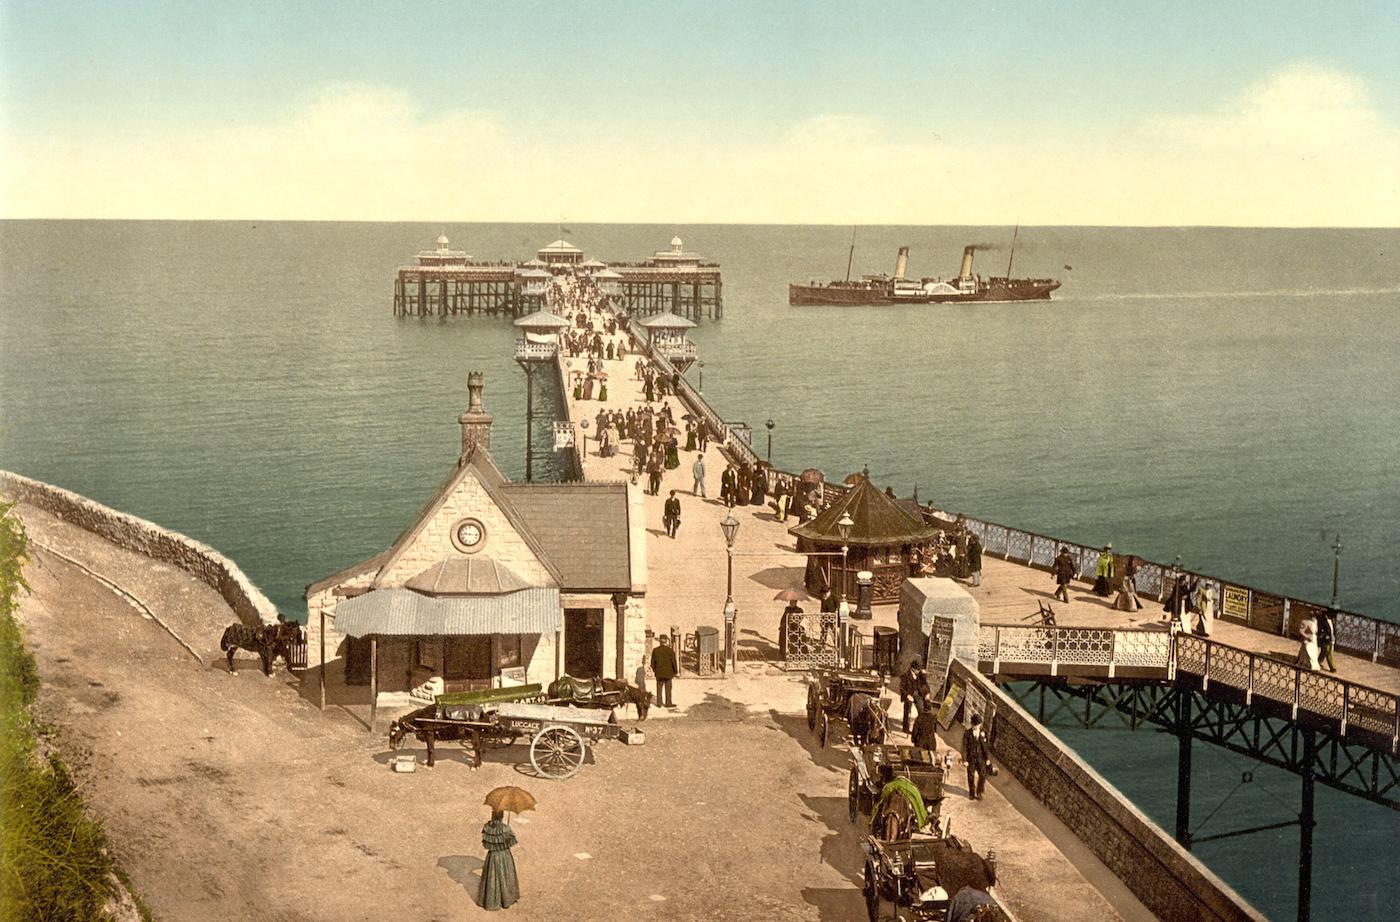 Vintage colour photo, c. 1890, of Llandudno Pier on the North Wales coast. It opened in 1877 and incorporated a landing stage for steam ships.